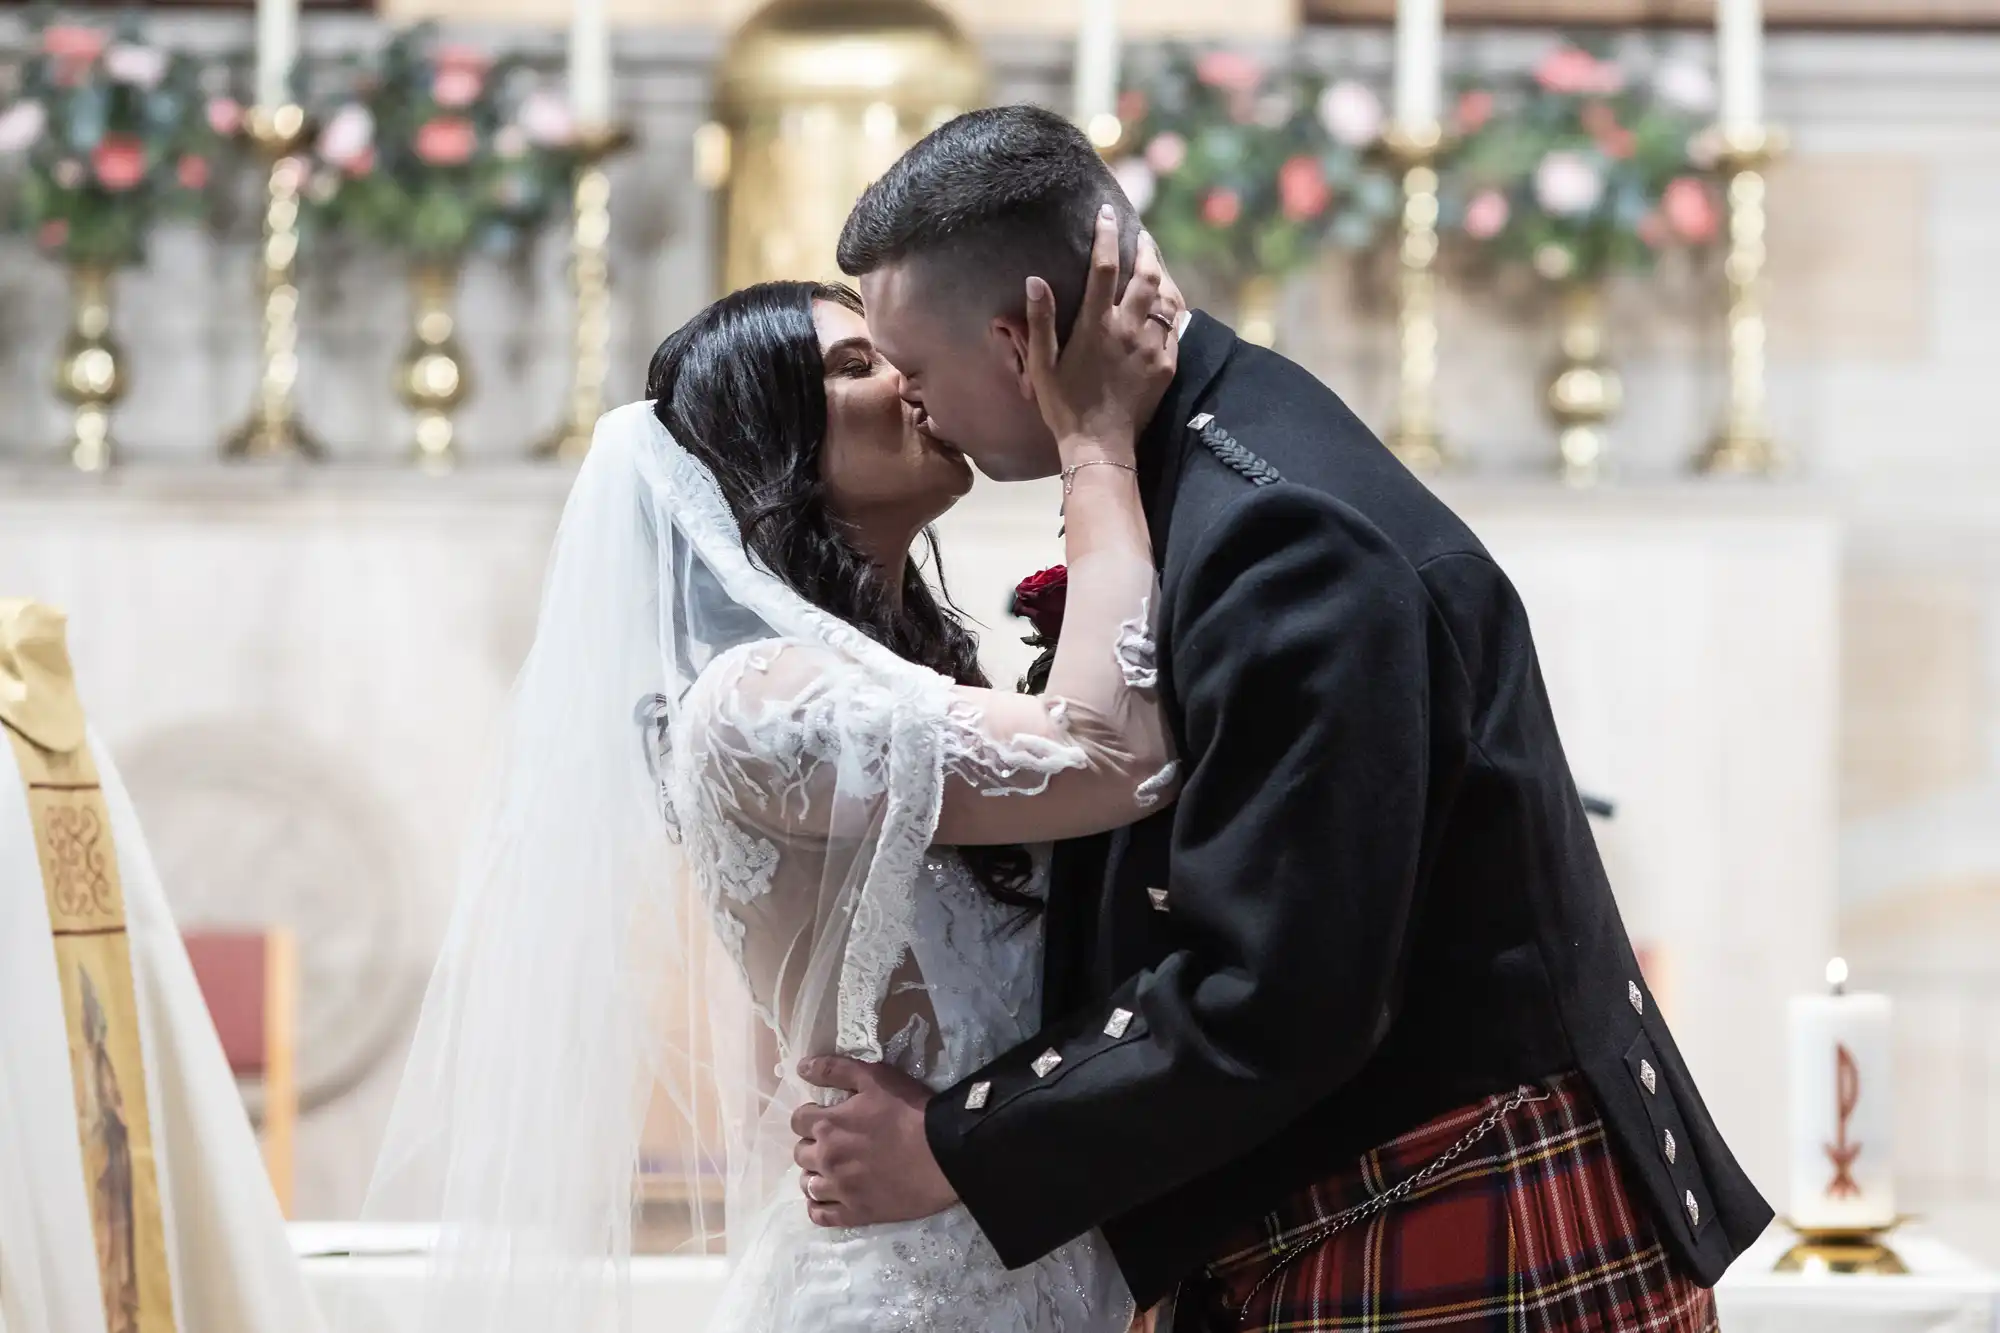 A bride in a white dress and a groom in a kilt passionately kiss in a church decorated with flowers.